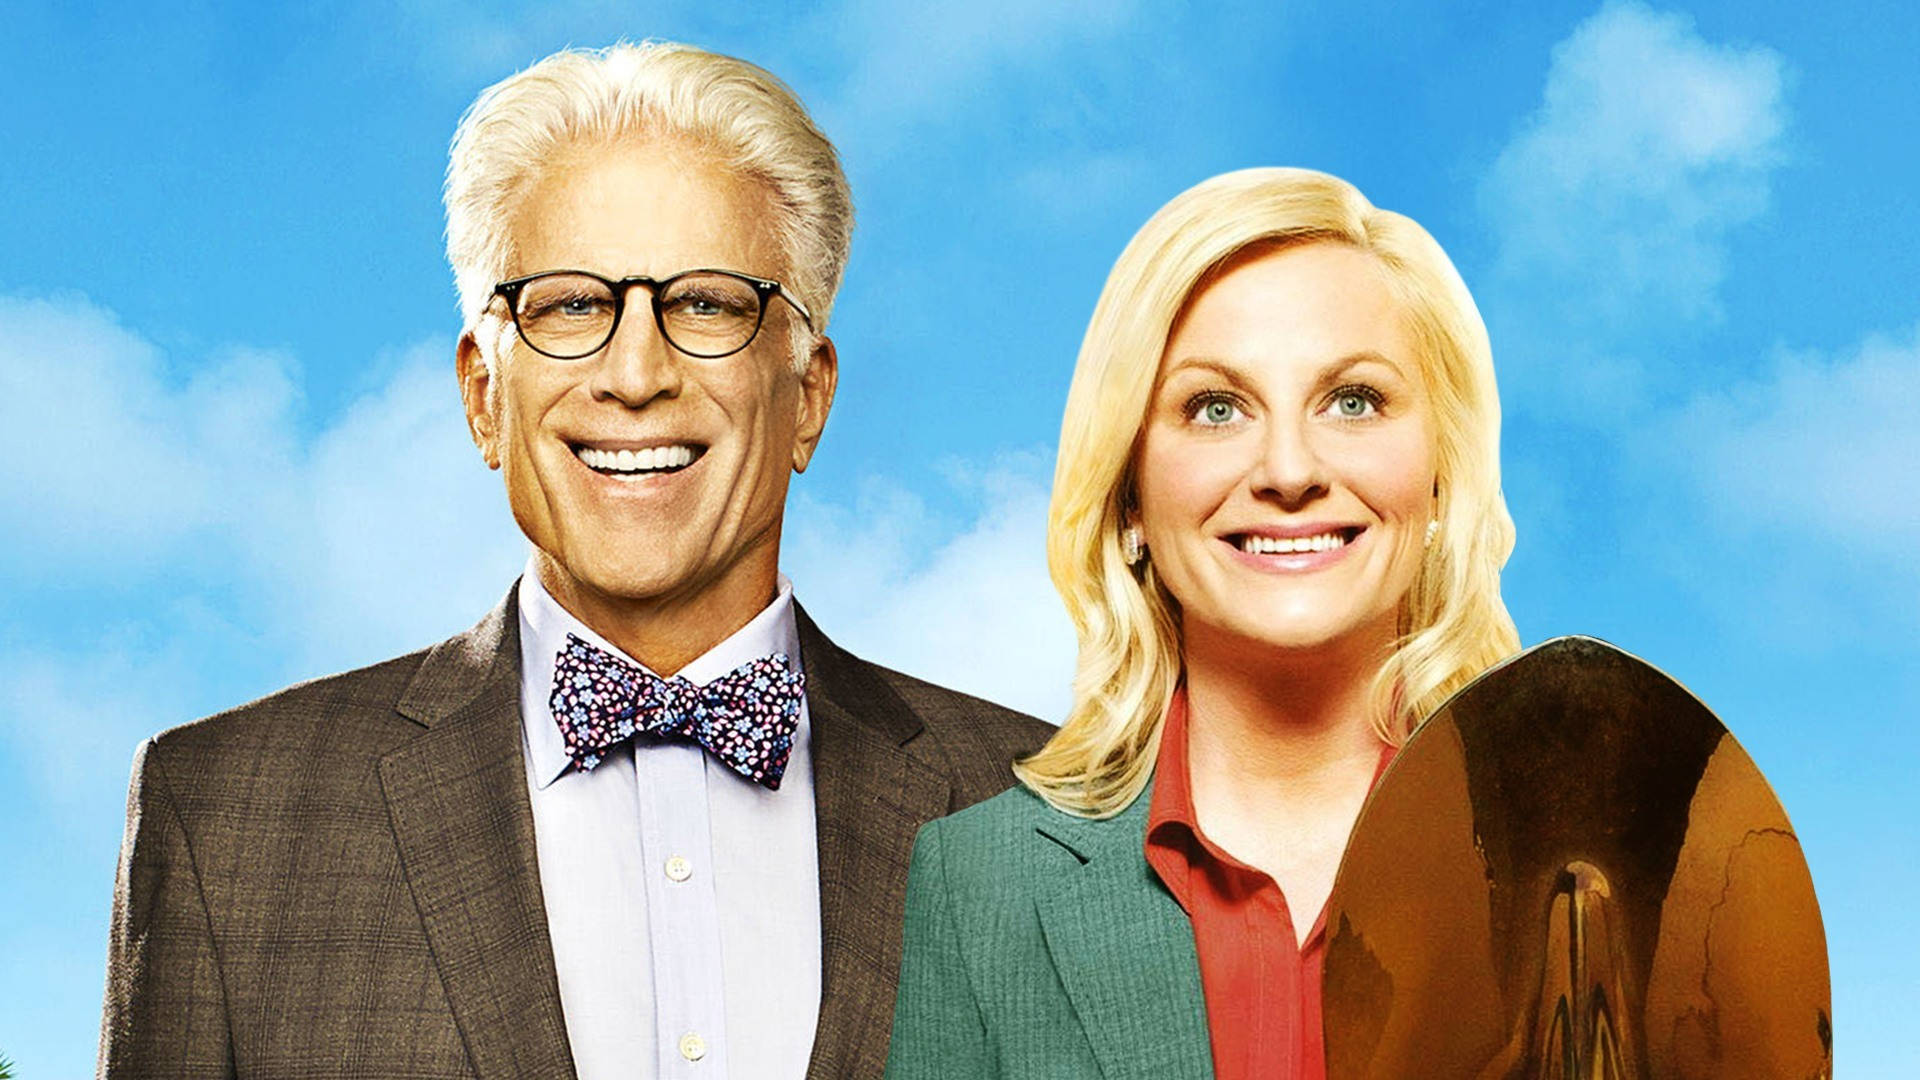 The Good Place Michael And Eleanor On Blue Sky Background